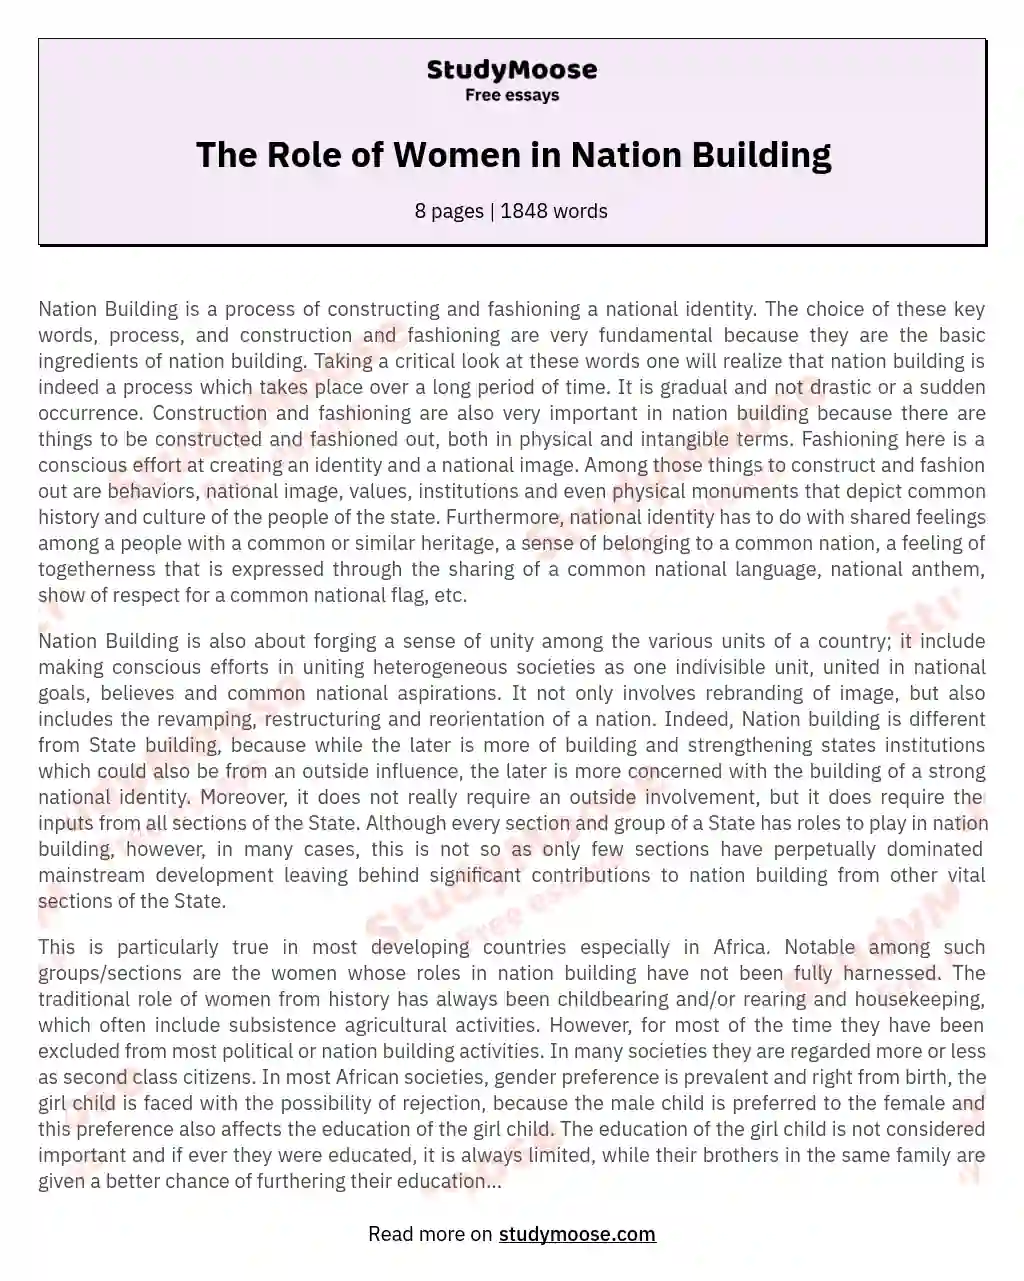 The Role of Women in Nation Building essay